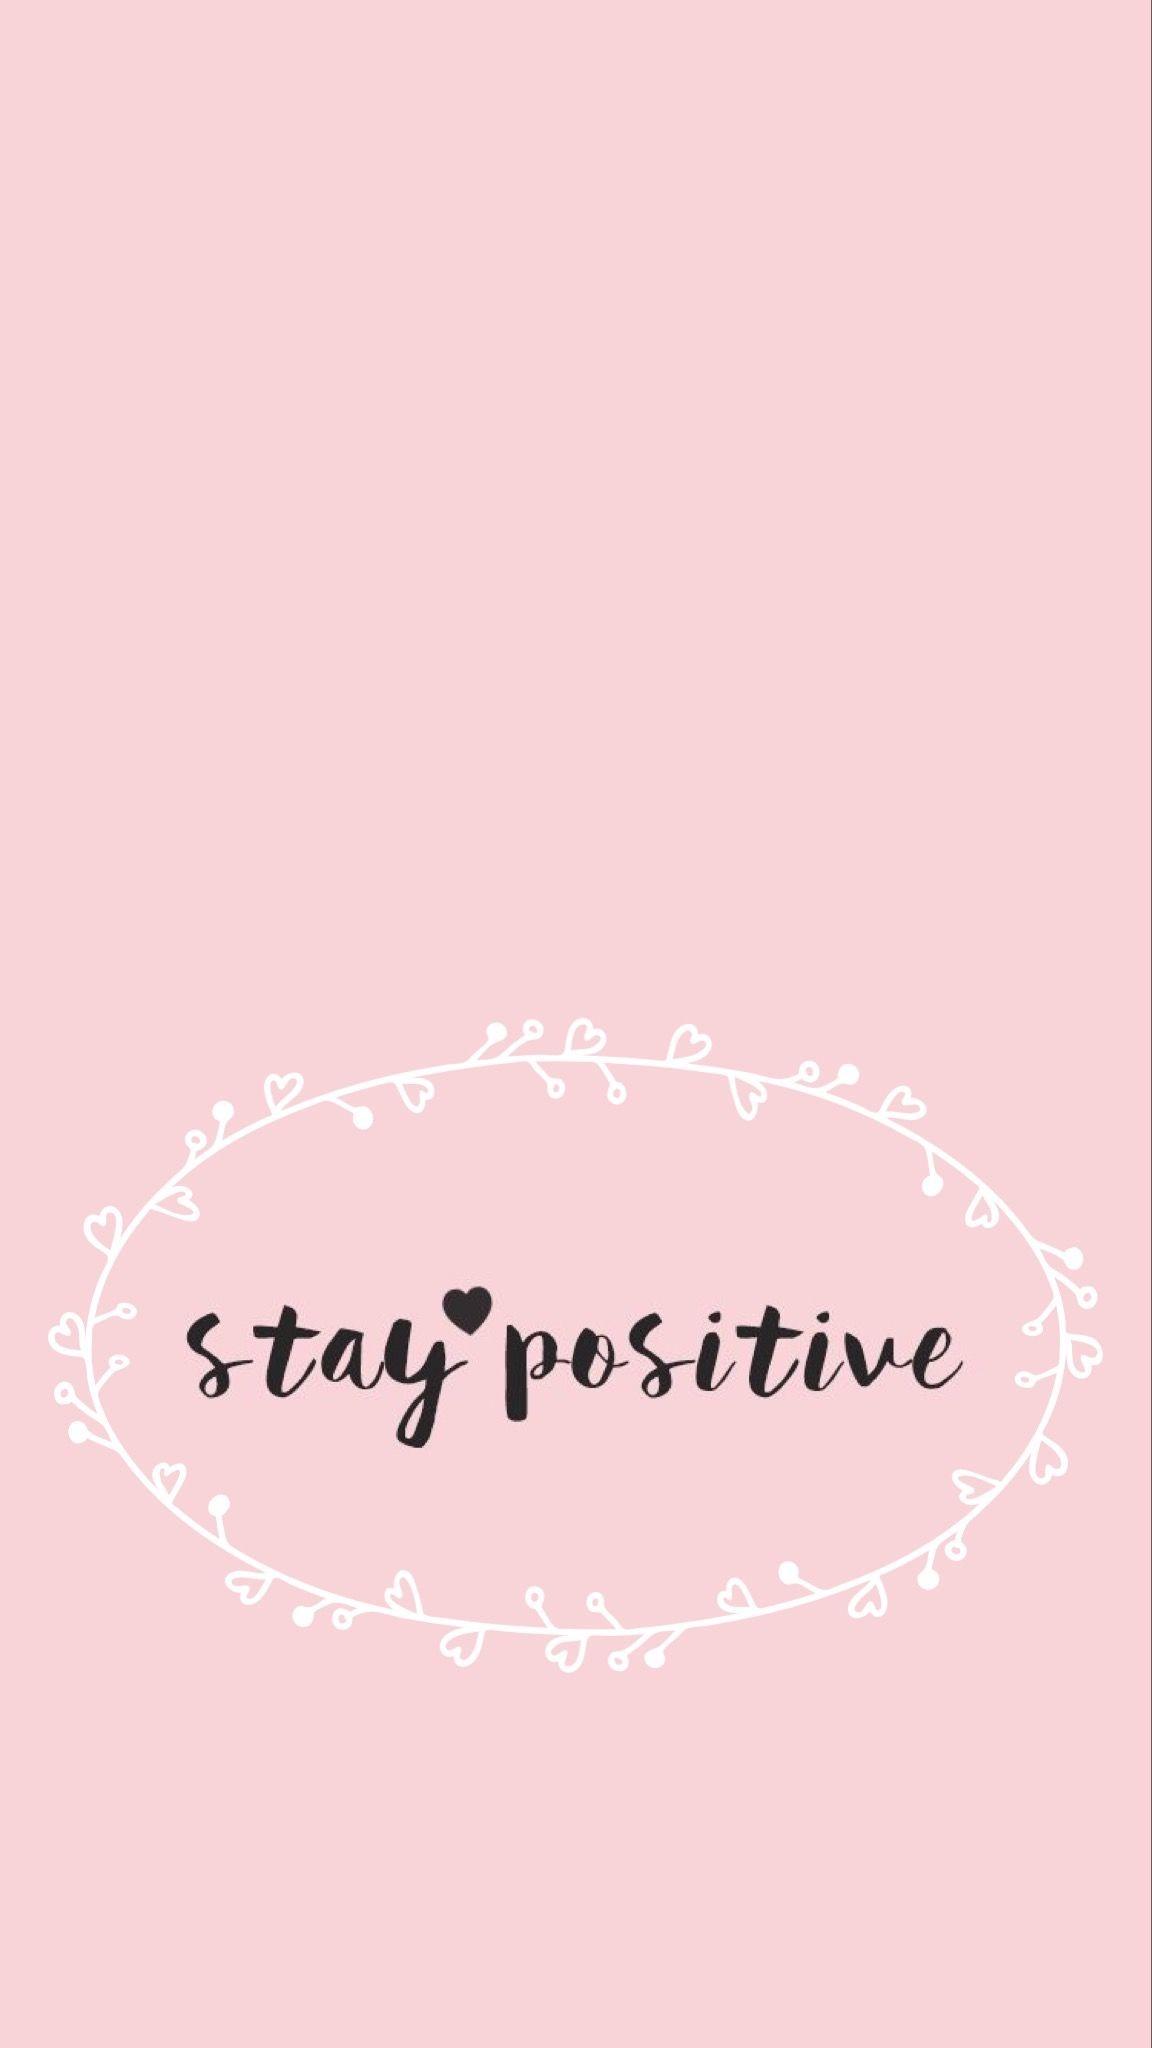 Aesthetic Quote Positive Wallpapers - Wallpaper Cave